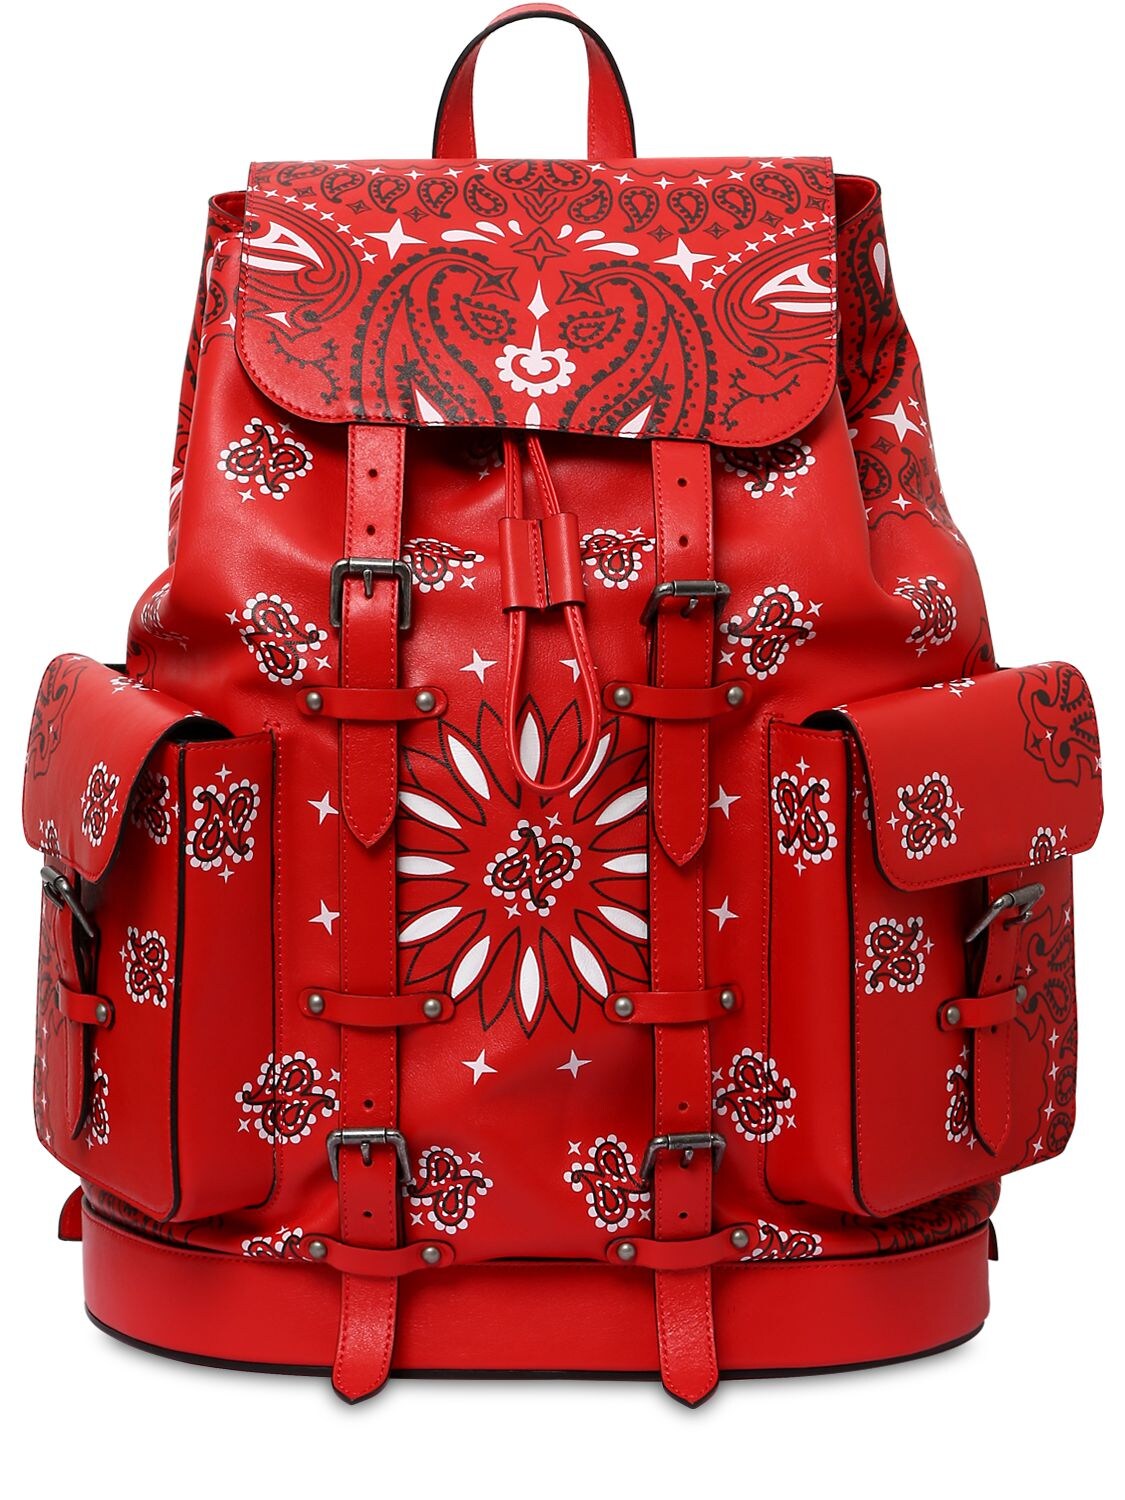 Htc Los Angeles Bandana Print Leather Belt Bag In Red